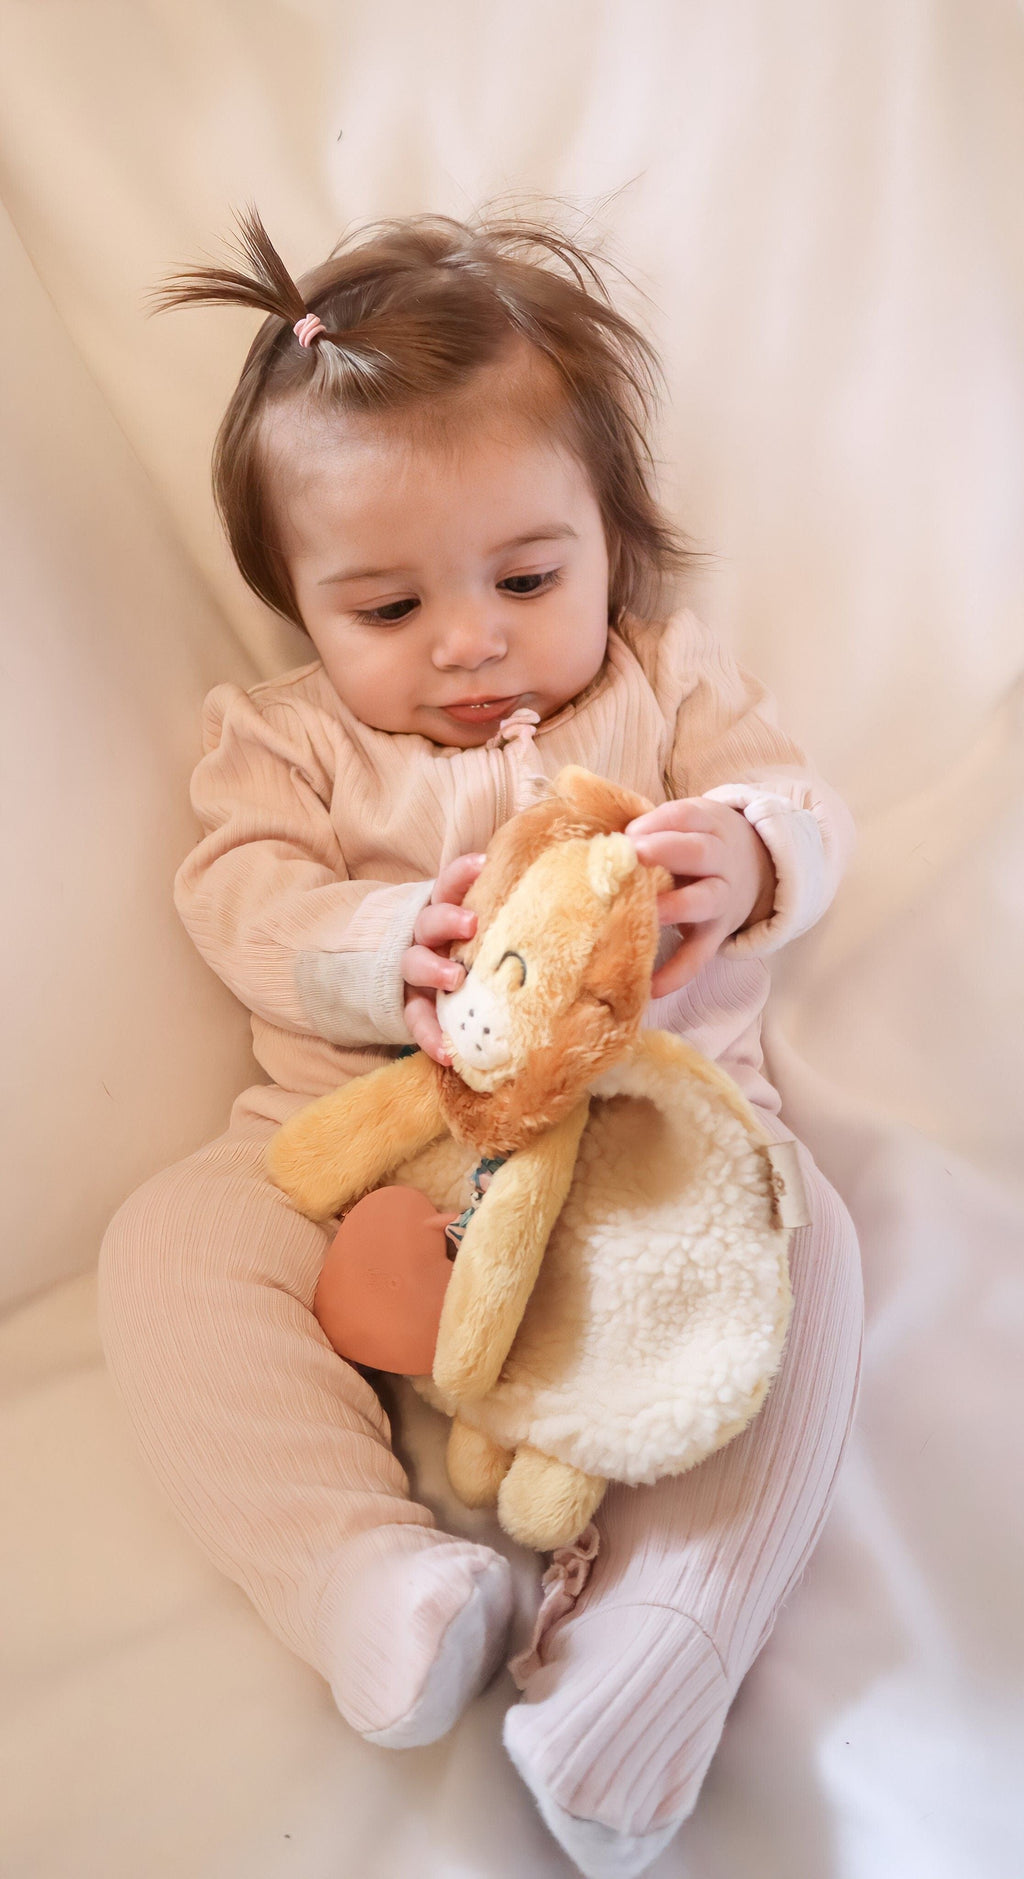 Itzy Lovey Lion Plush with Silicone Teether Toy